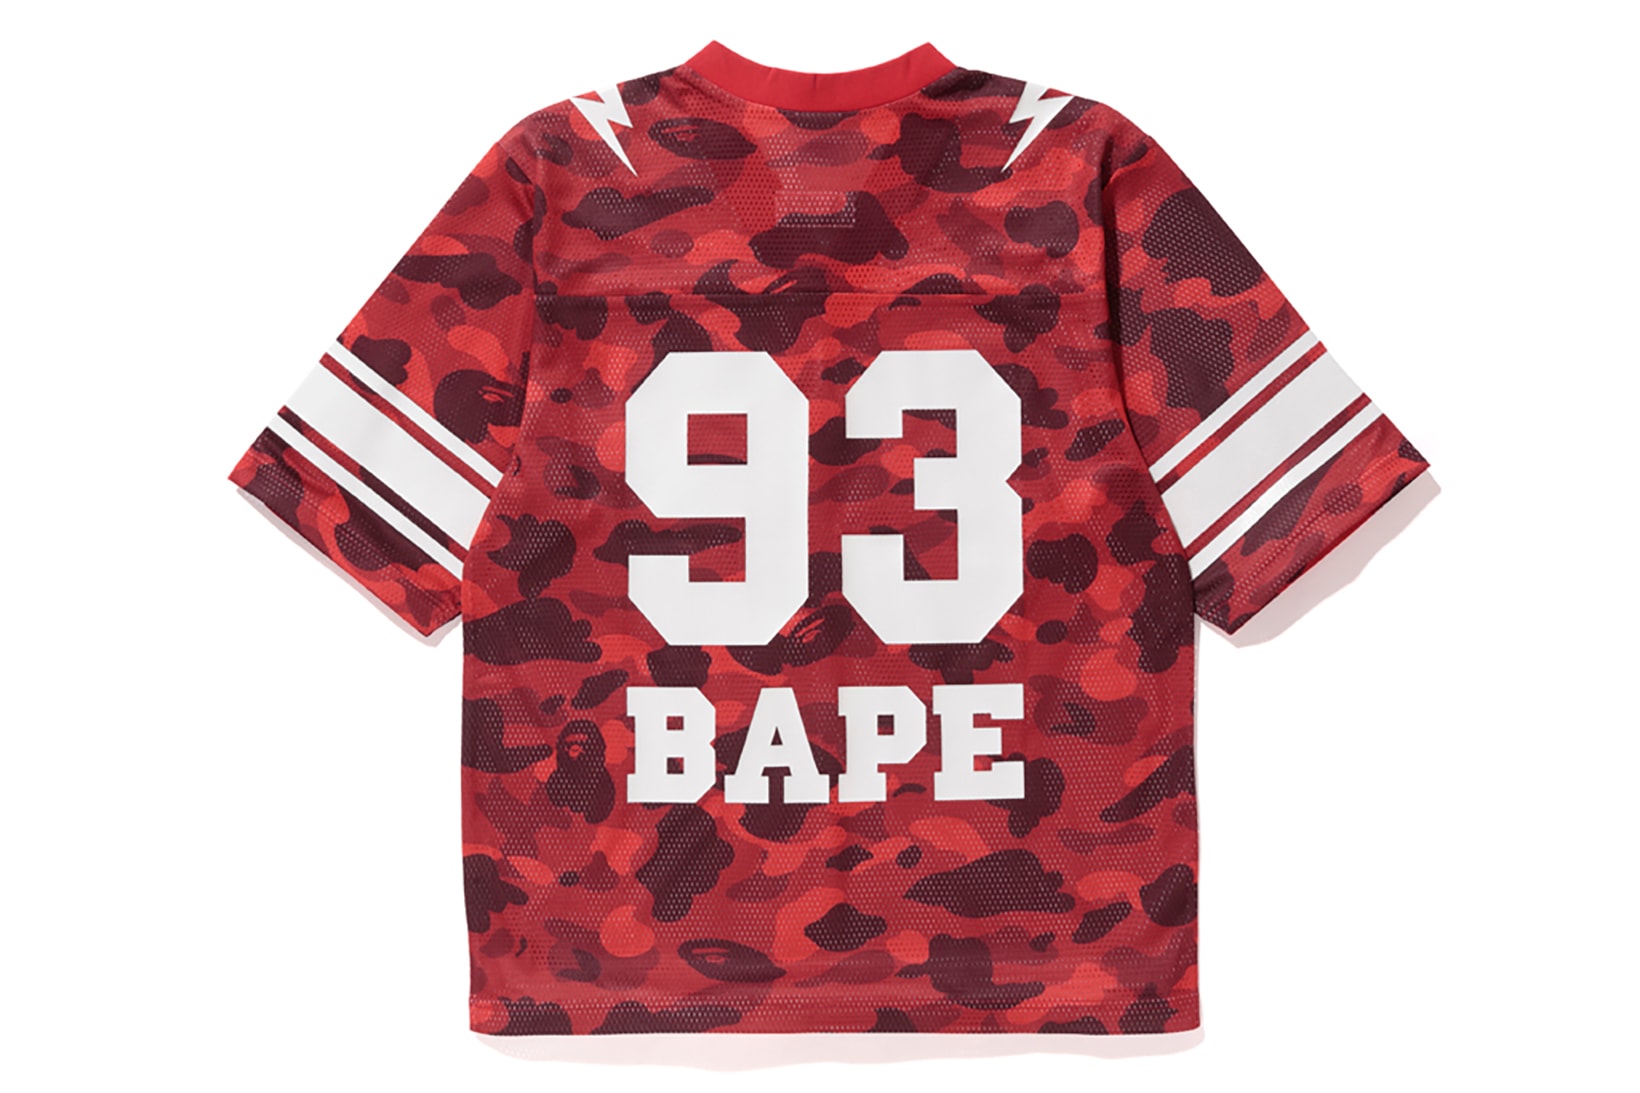 Bape x Champion Red Camouflage NFL Top Reverse